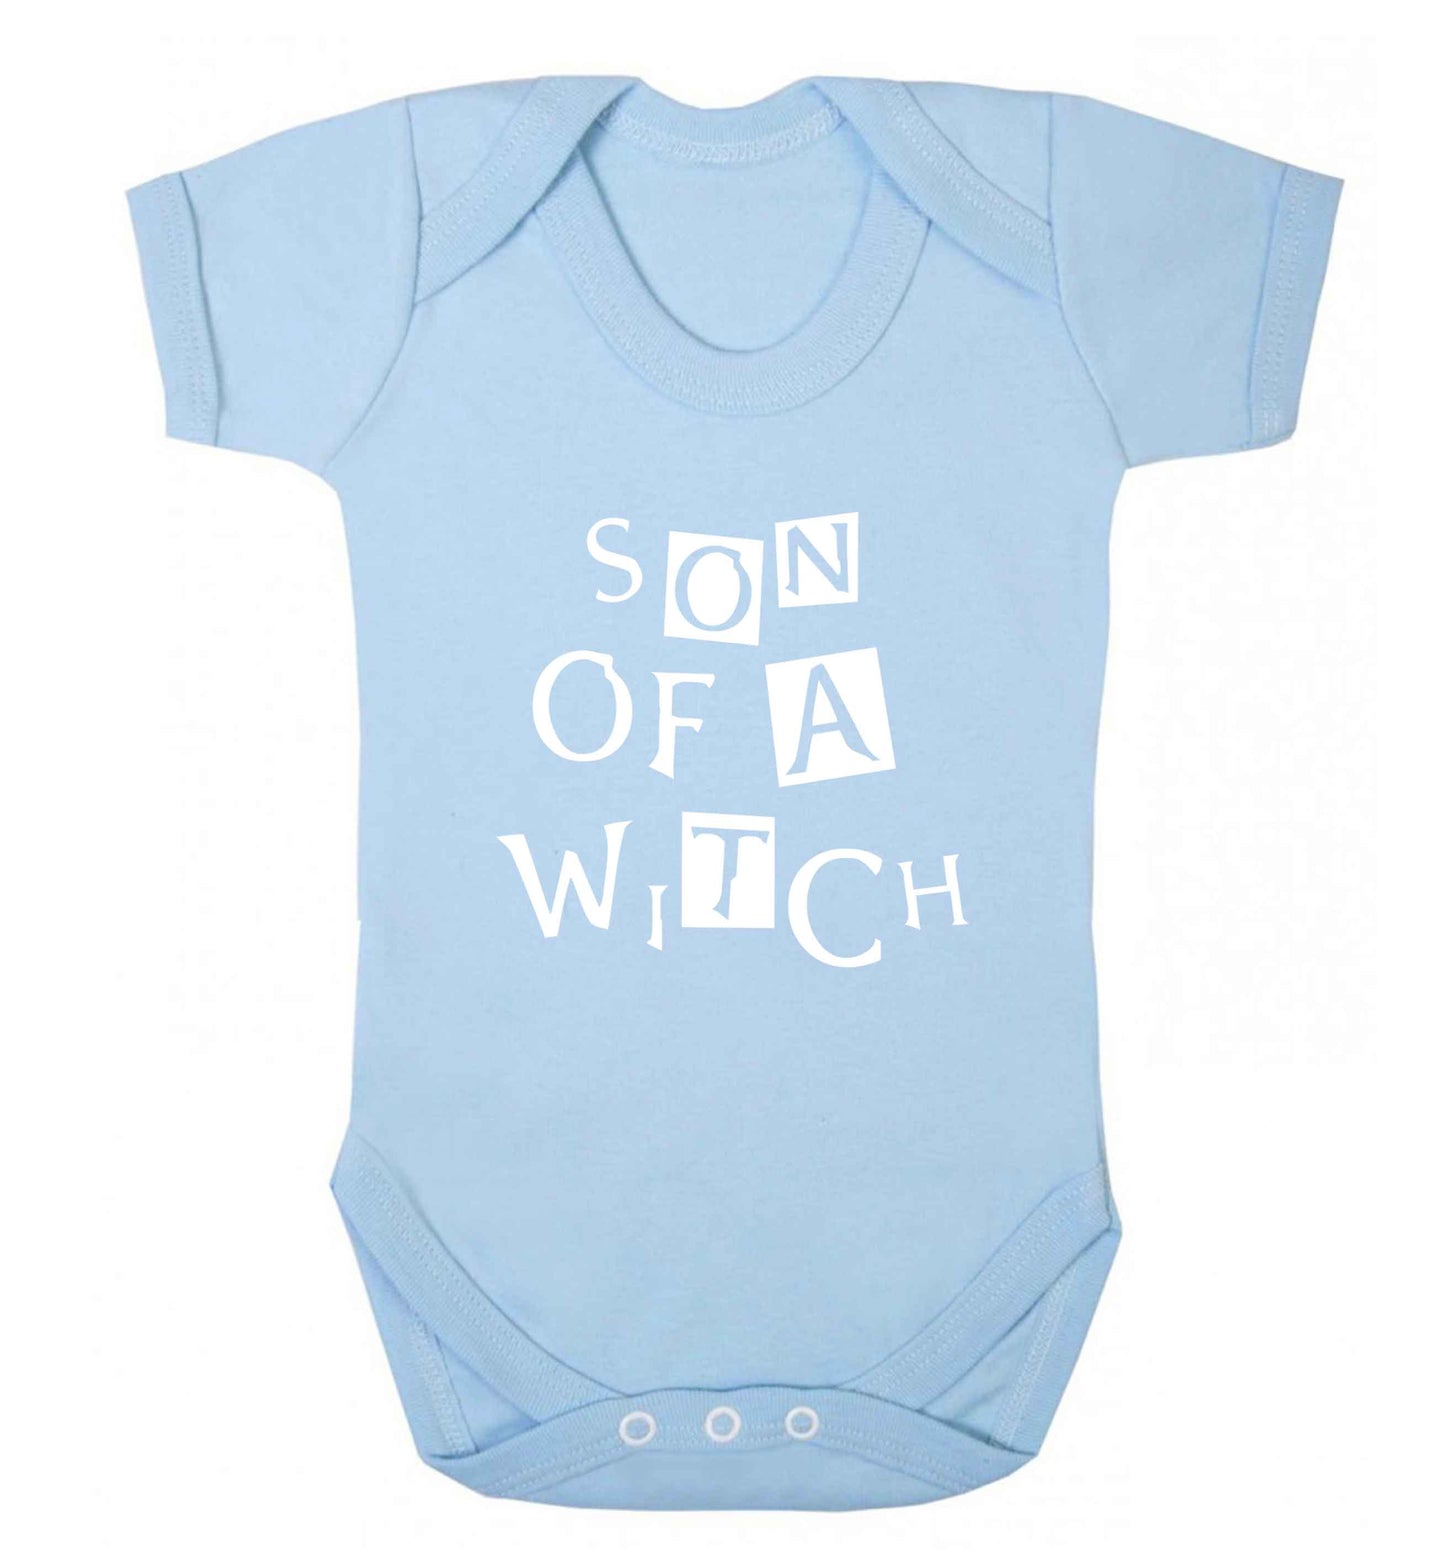 Son of a witch baby vest pale blue 18-24 months